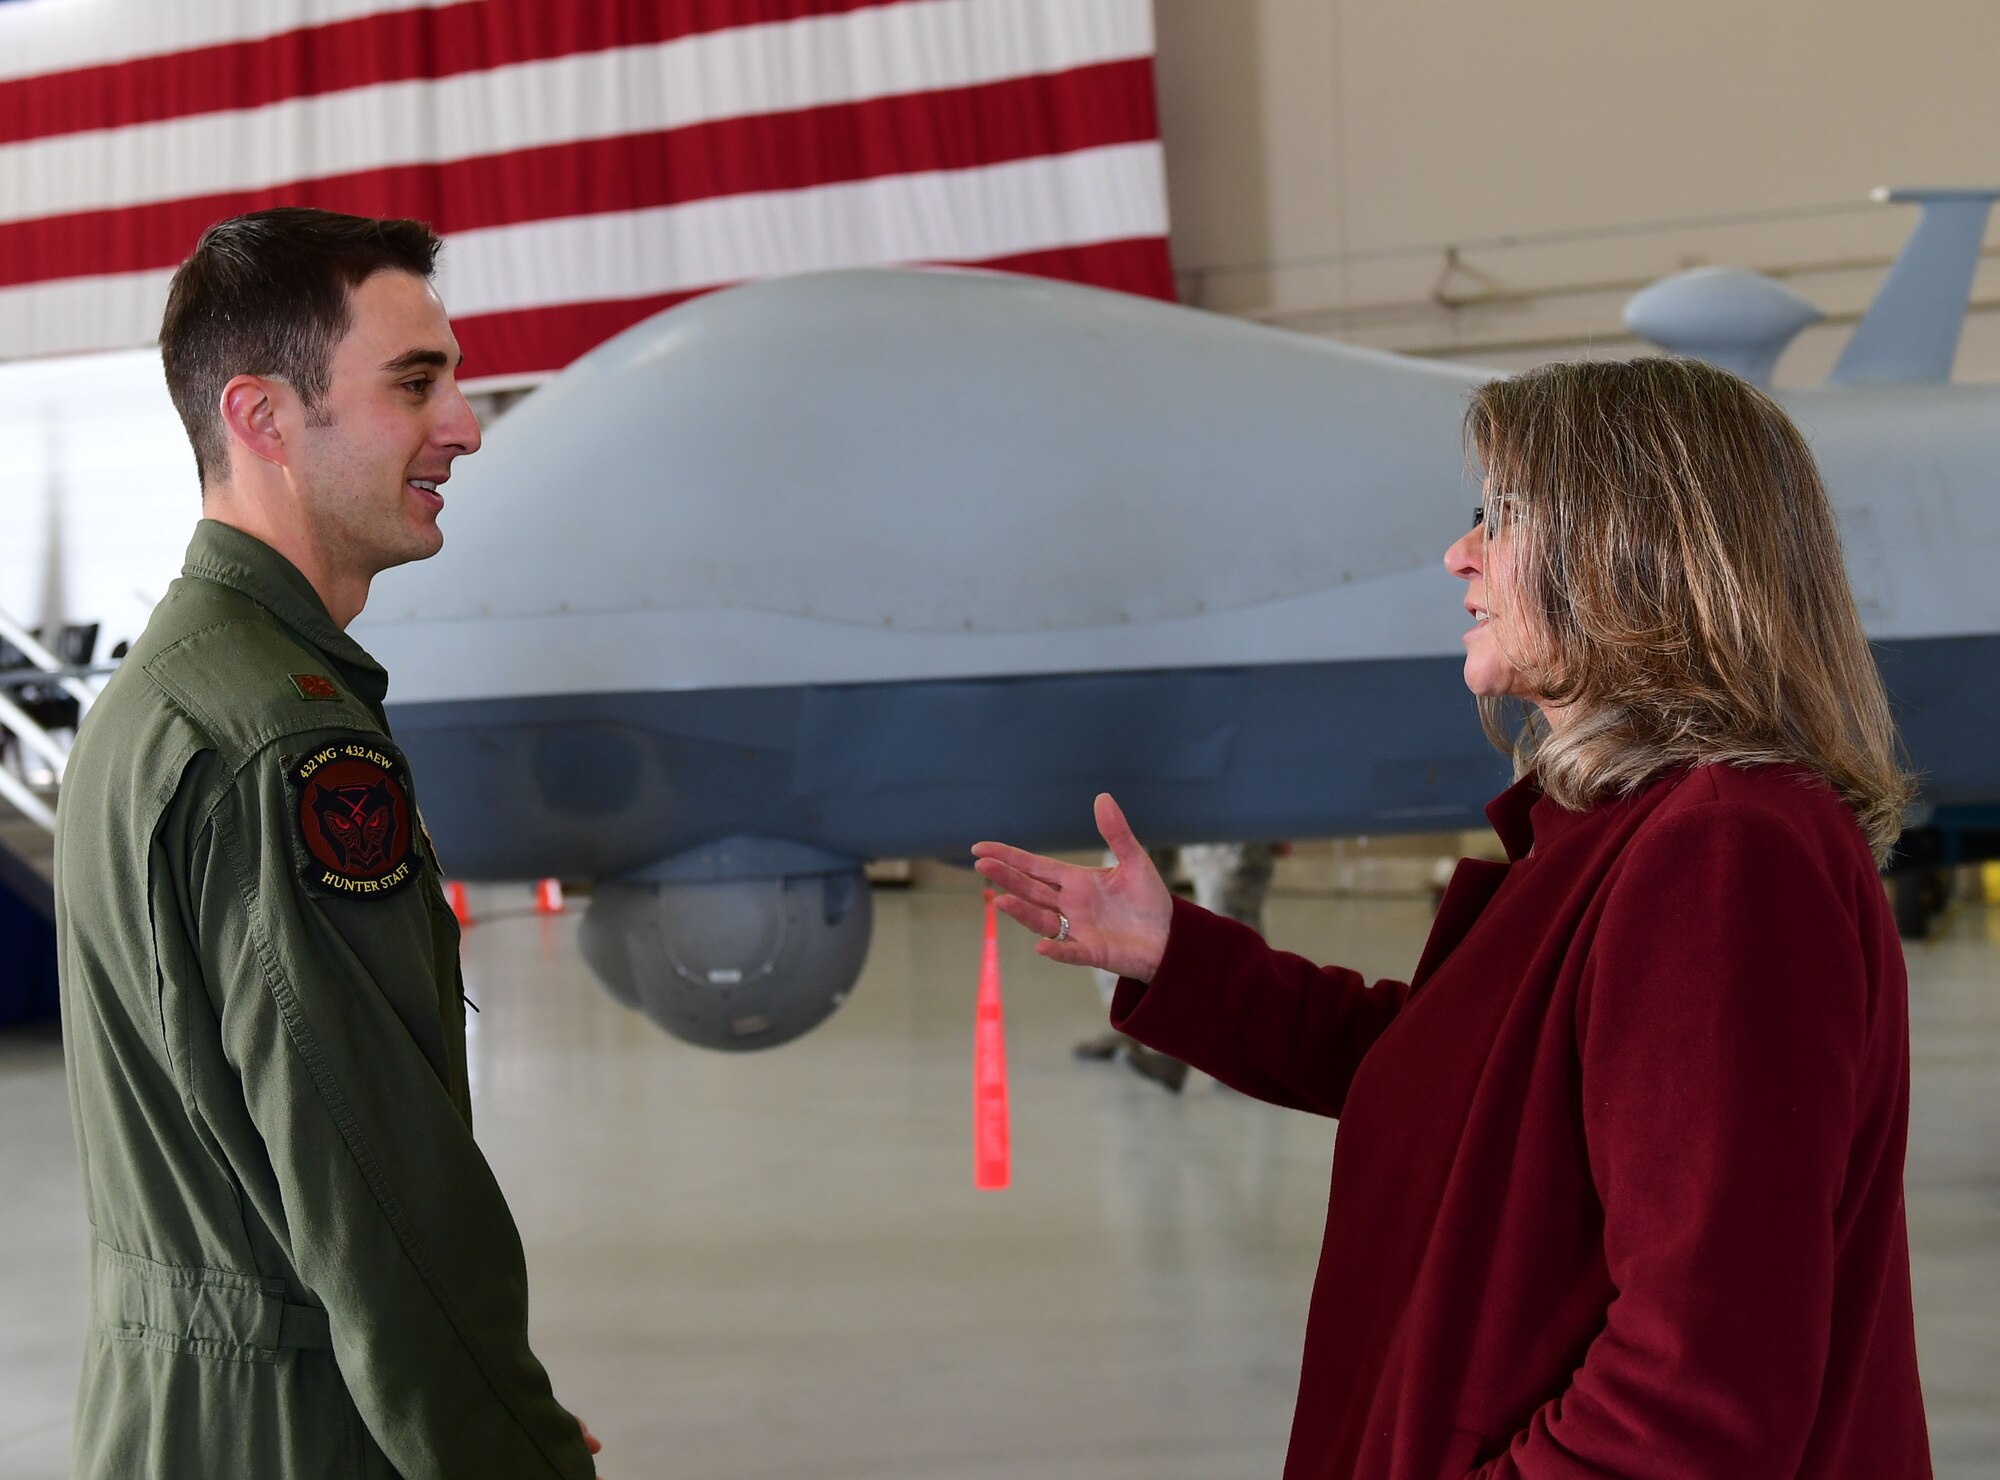 Ms. Jonna Doolittle Hoppes, executive director of the Doolittle Foundation and granddaughter of Gen. James “Jimmy” Doolittle, speaks to Maj. Matthew, 432nd Wing pilot, Jan. 18, 2018, at Creech Air Force Base, Nev. Ms. Doolittle Hoppes toured the base with retired Lt. Gen. Christopher Miller, president of the Air Force Historical Foundation, before presenting the General James H. “Jimmy” Doolittle award to the 432nd Wing/432nd Air Expeditionary Wing. (U.S. Air Force photo/Senior Airman Christian Clausen)